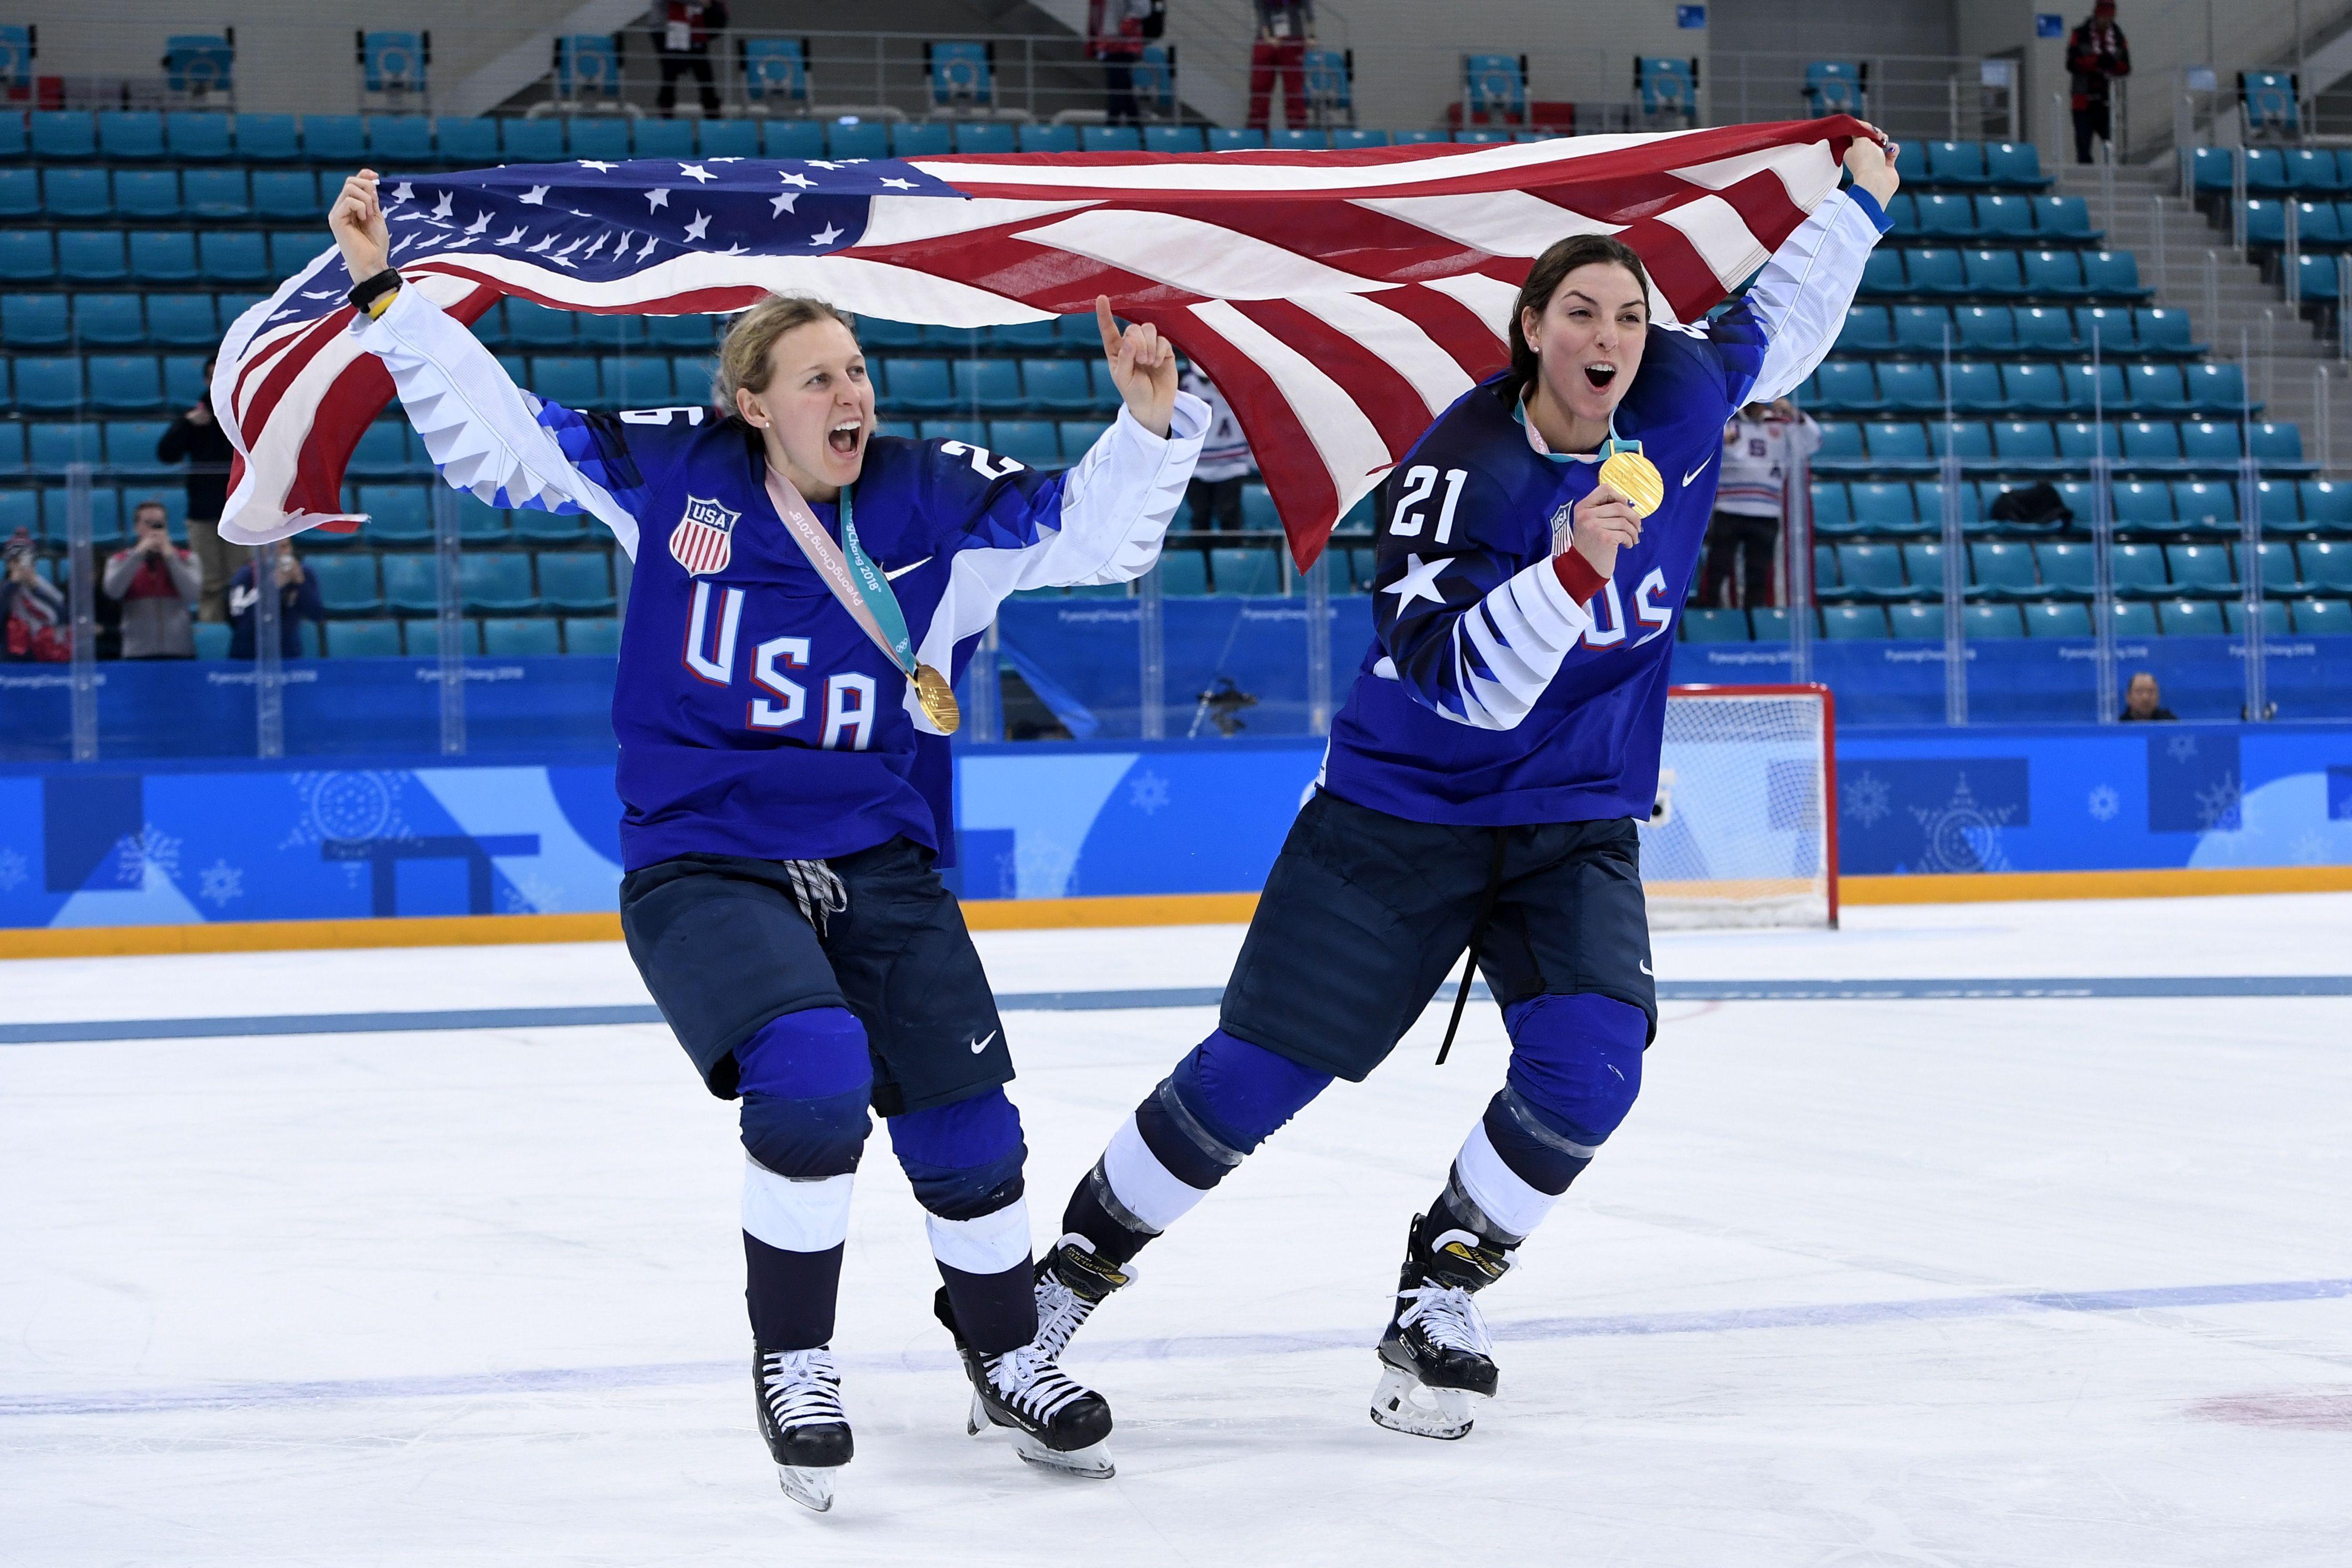 2 days until Sochi! Here's Hilary Knight from the US Women's